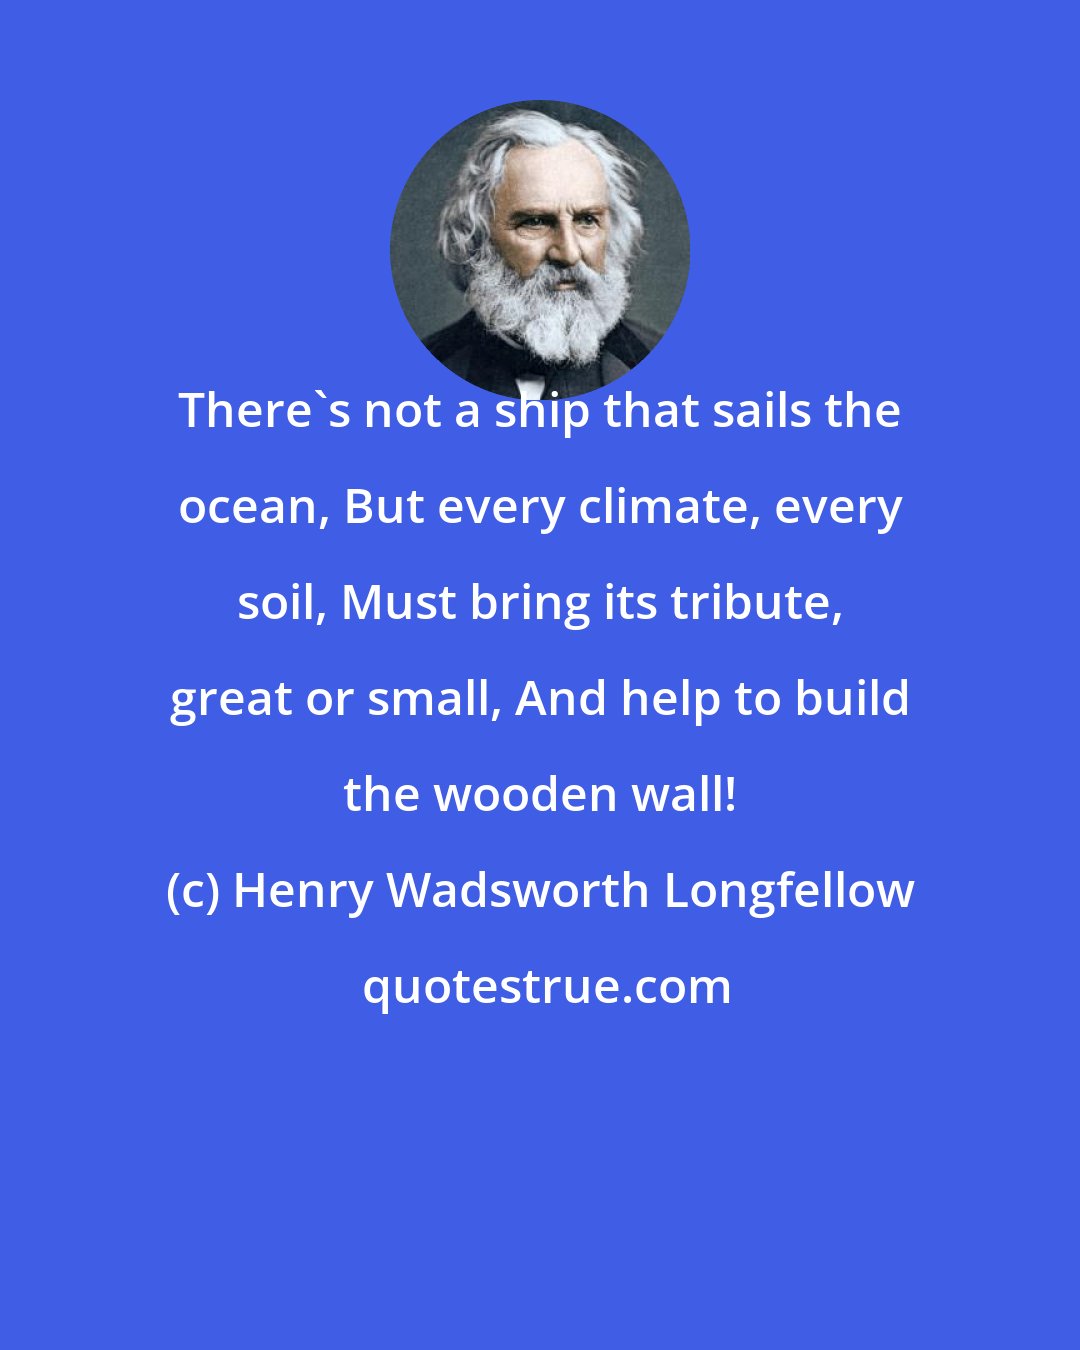 Henry Wadsworth Longfellow: There's not a ship that sails the ocean, But every climate, every soil, Must bring its tribute, great or small, And help to build the wooden wall!